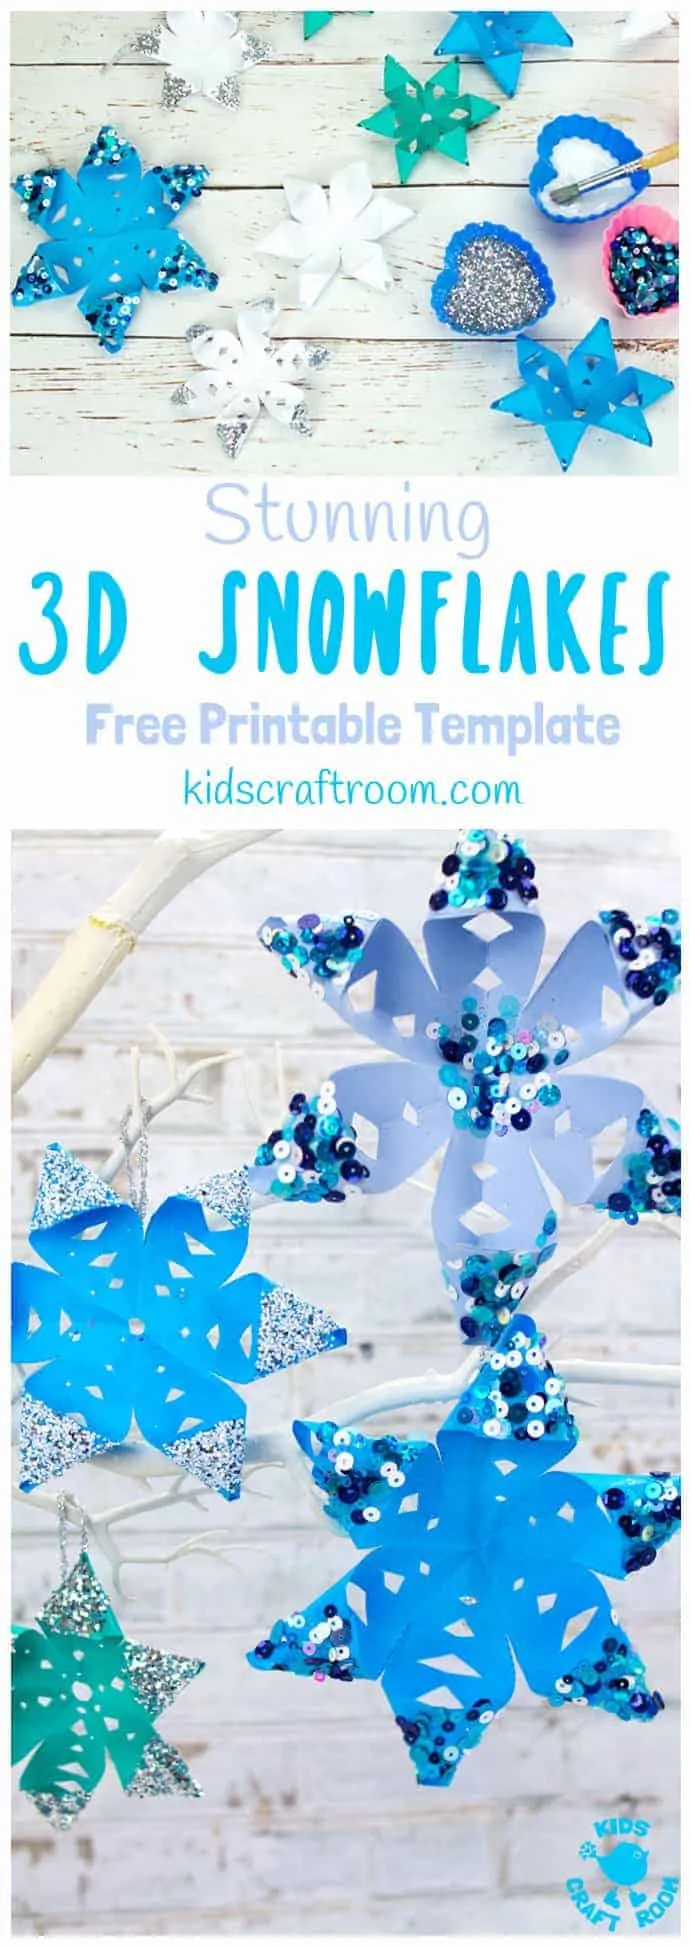 A collage showing 3d snowflakes from above and also hanging up.